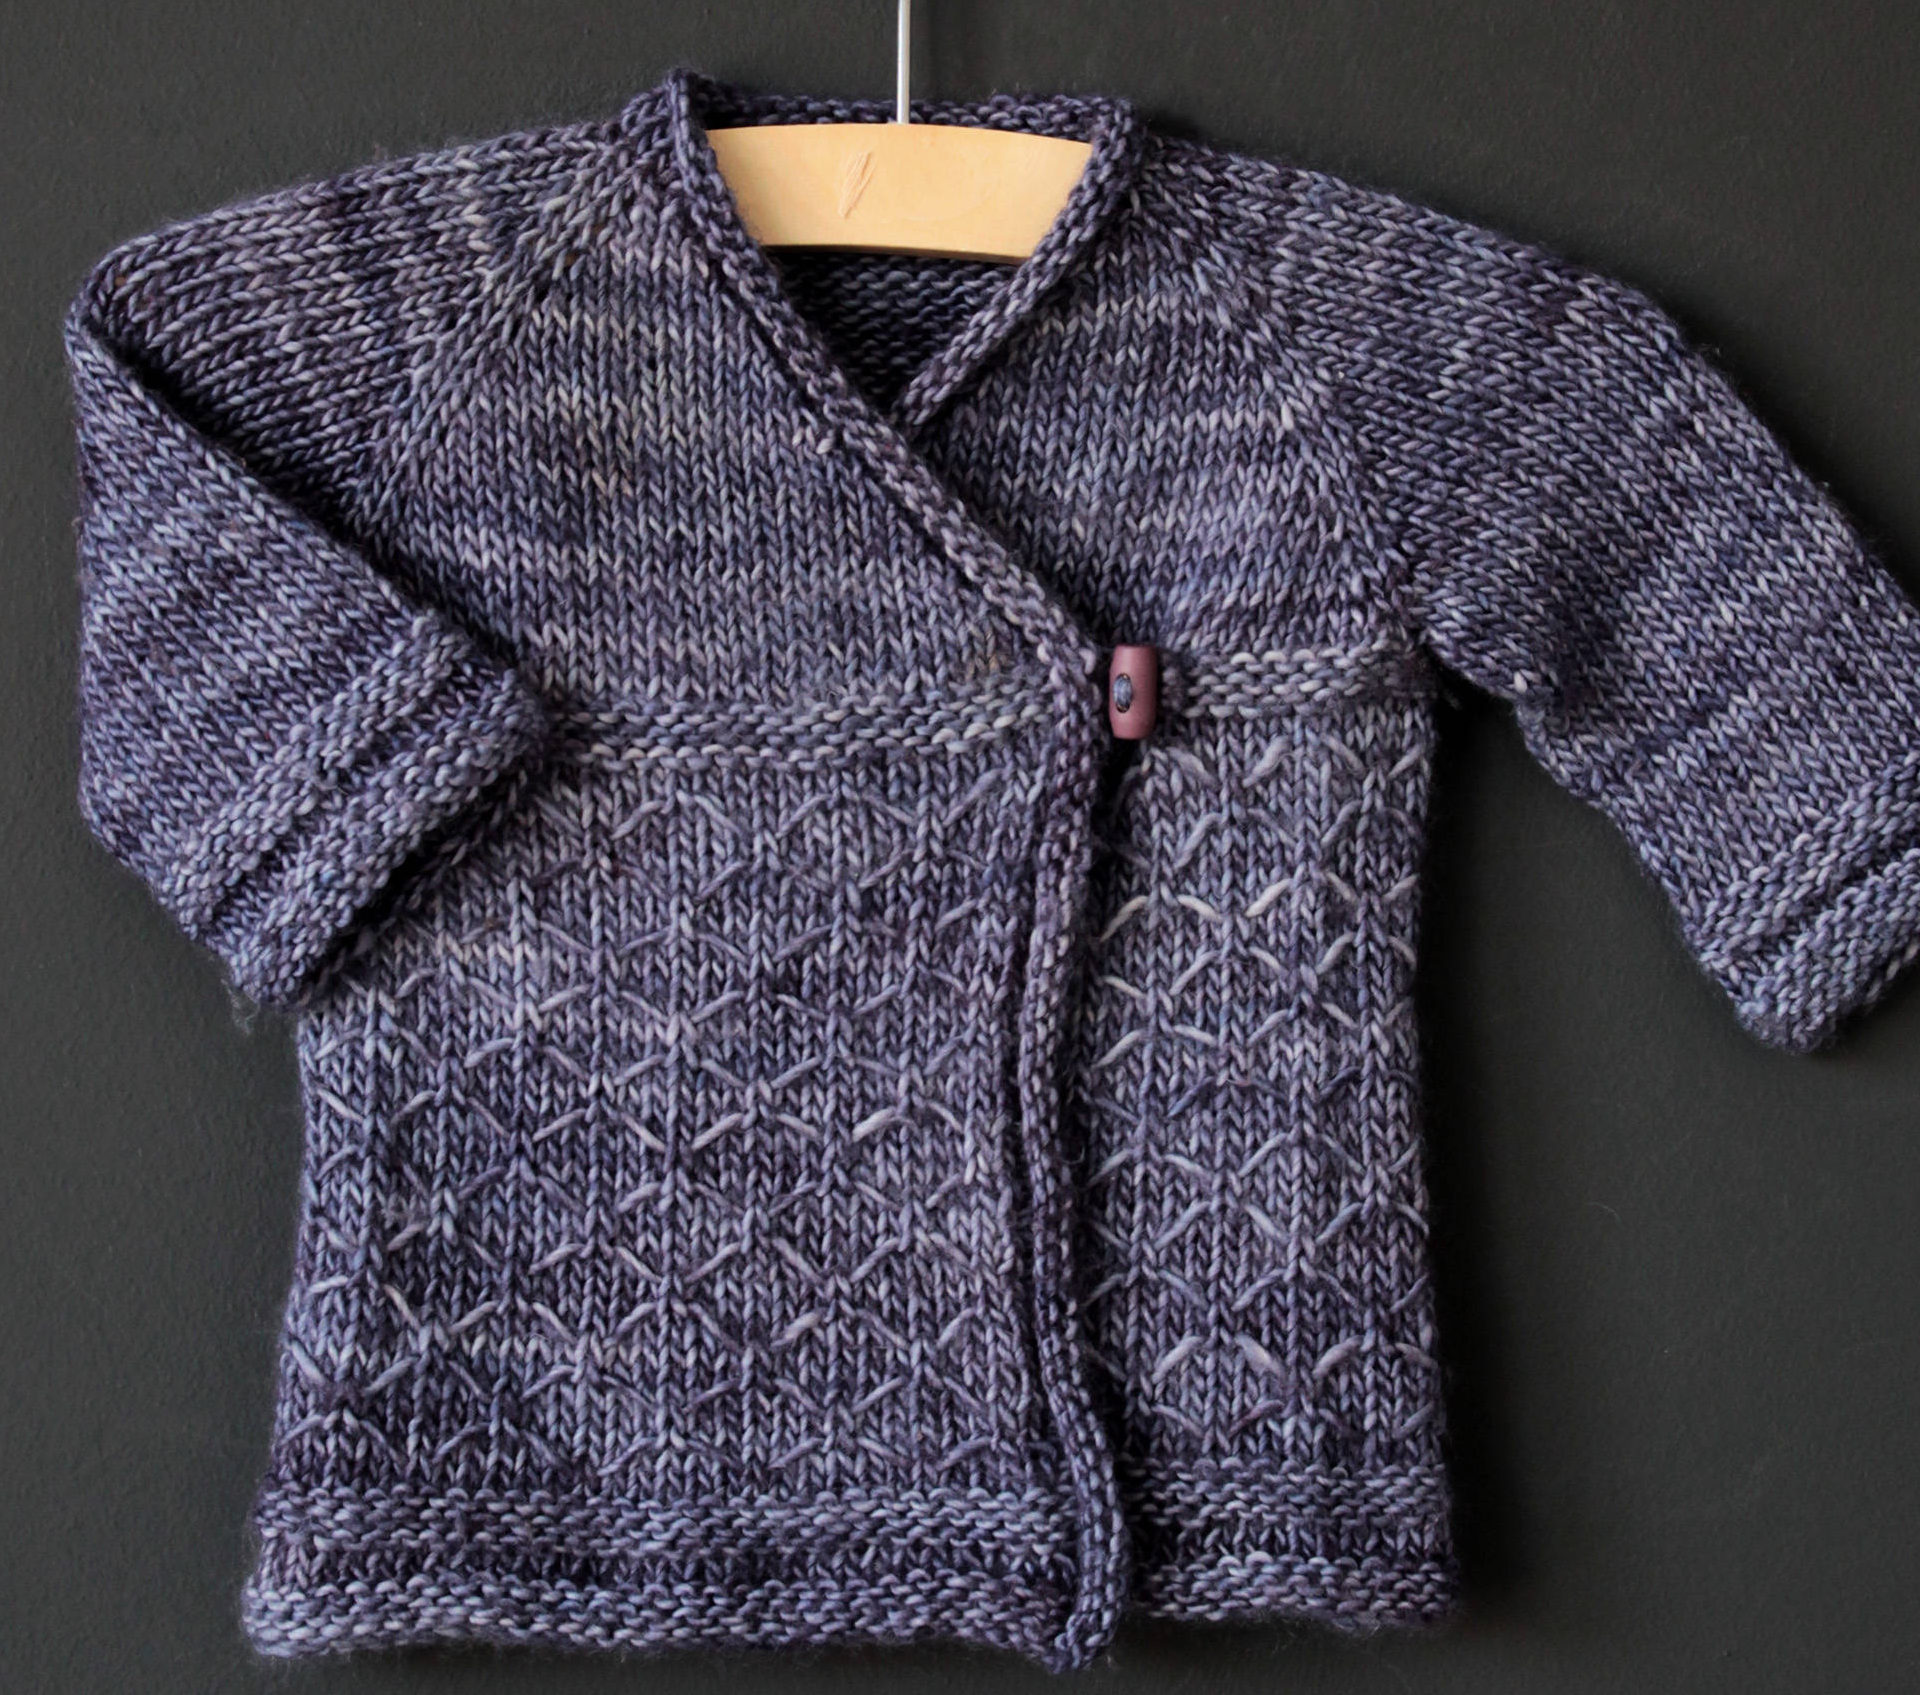 Knitting Pattern for Kyoto Crossover Baby Cardigan